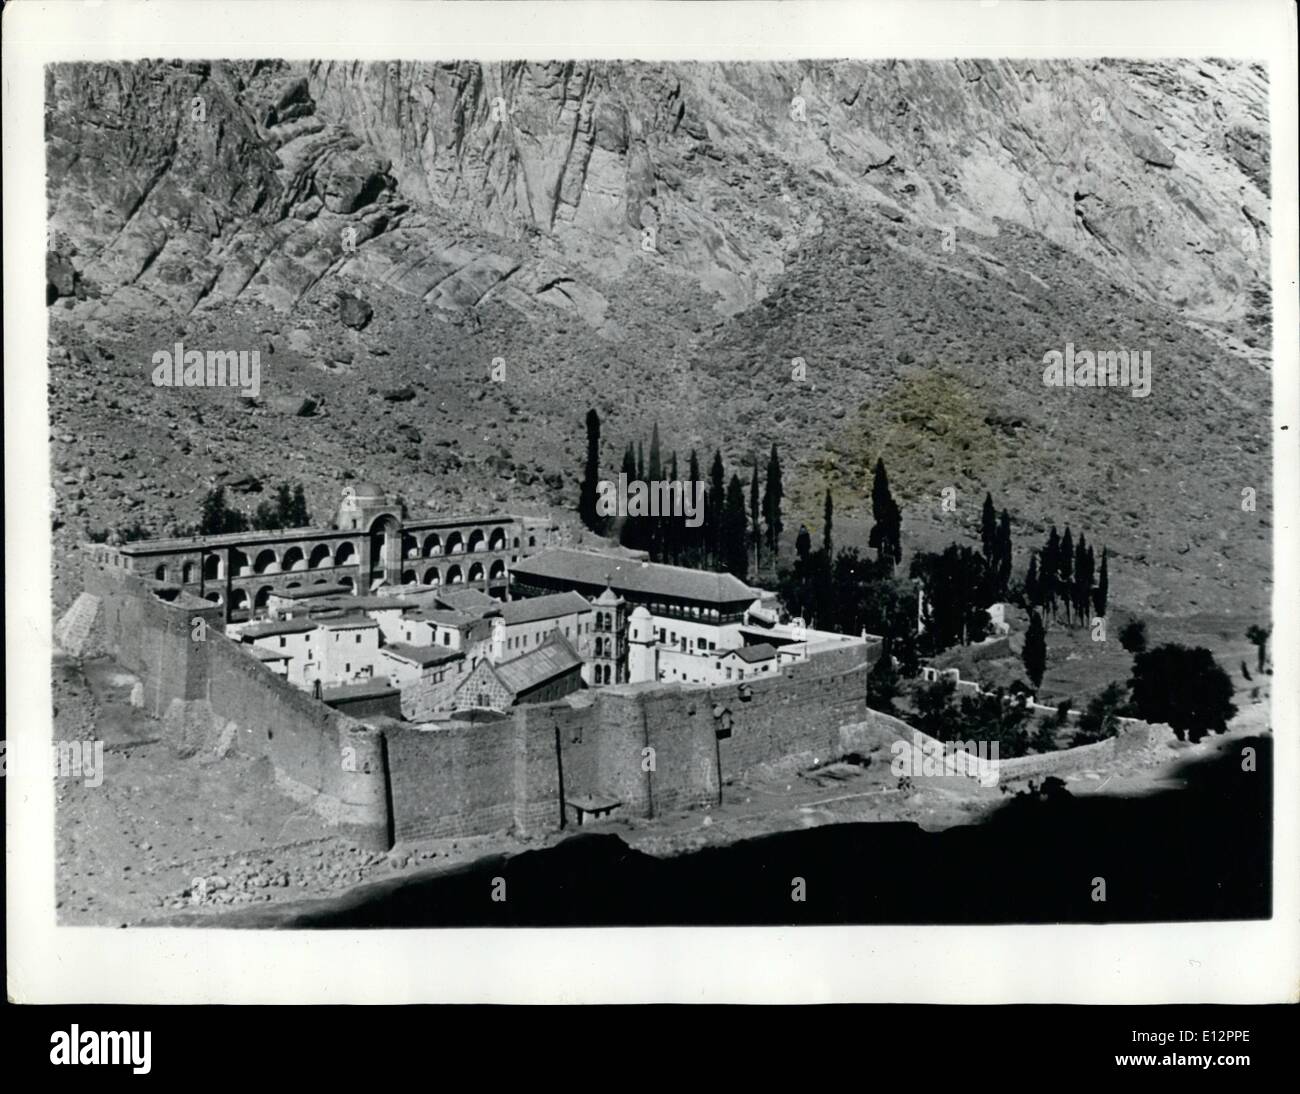 Feb. 24, 2012 - A view of St. Catherine's Monastery which was built in the sixth century AD by Emperor Justinian, and is the only monastery in the world to contain an Islamic Mosque. Stock Photo